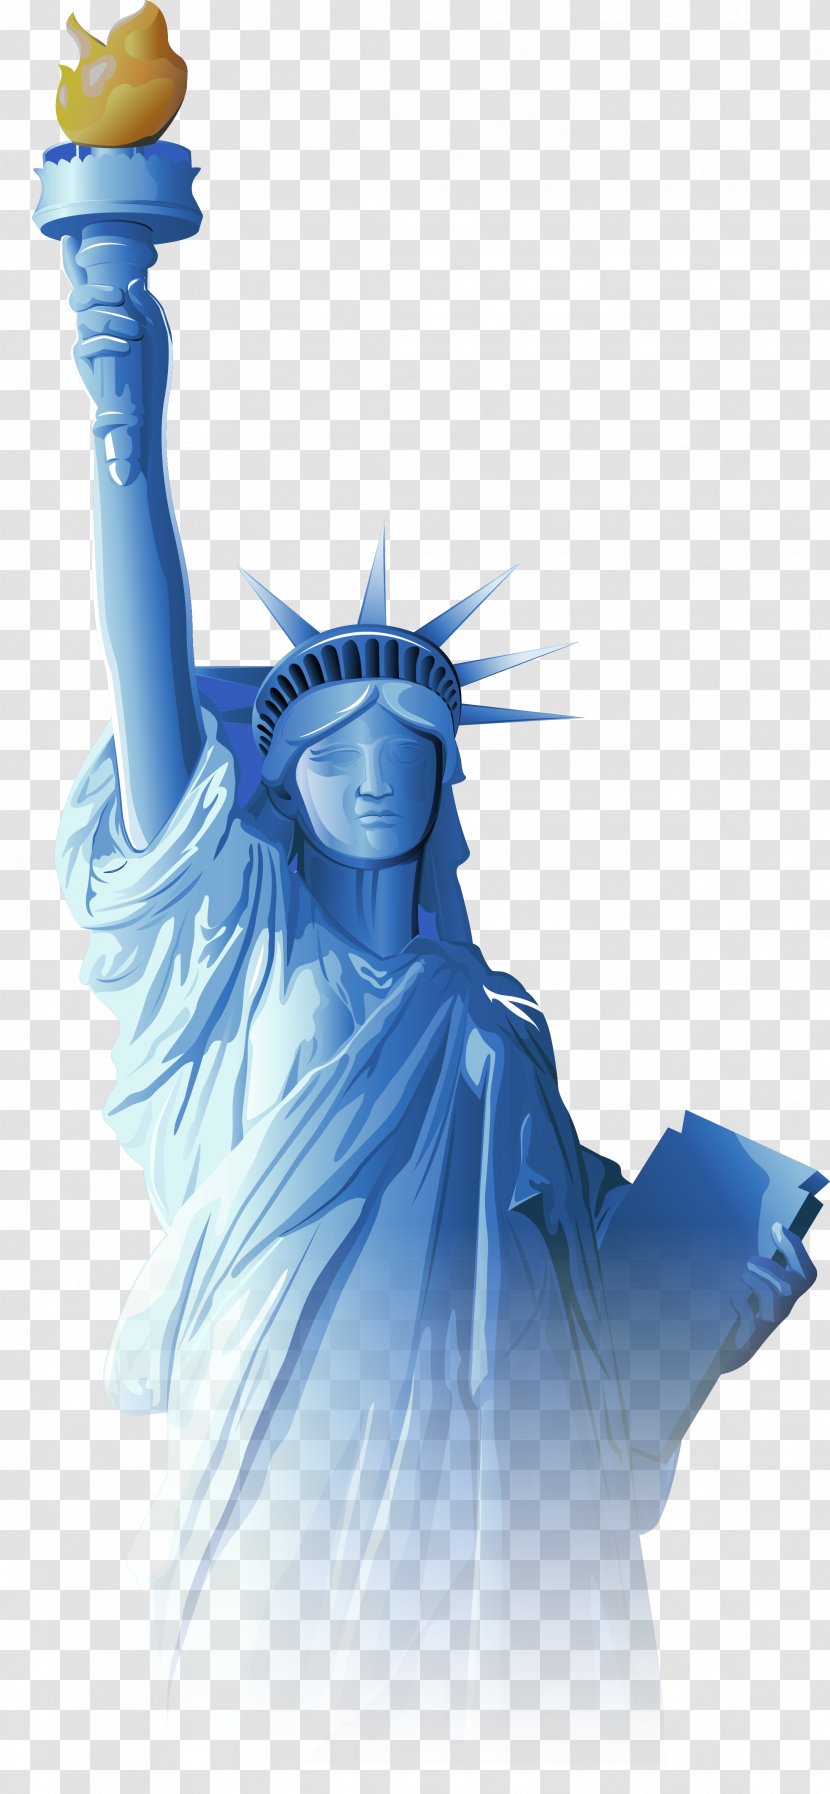 Statue Of Liberty Infographic - Visually Transparent PNG